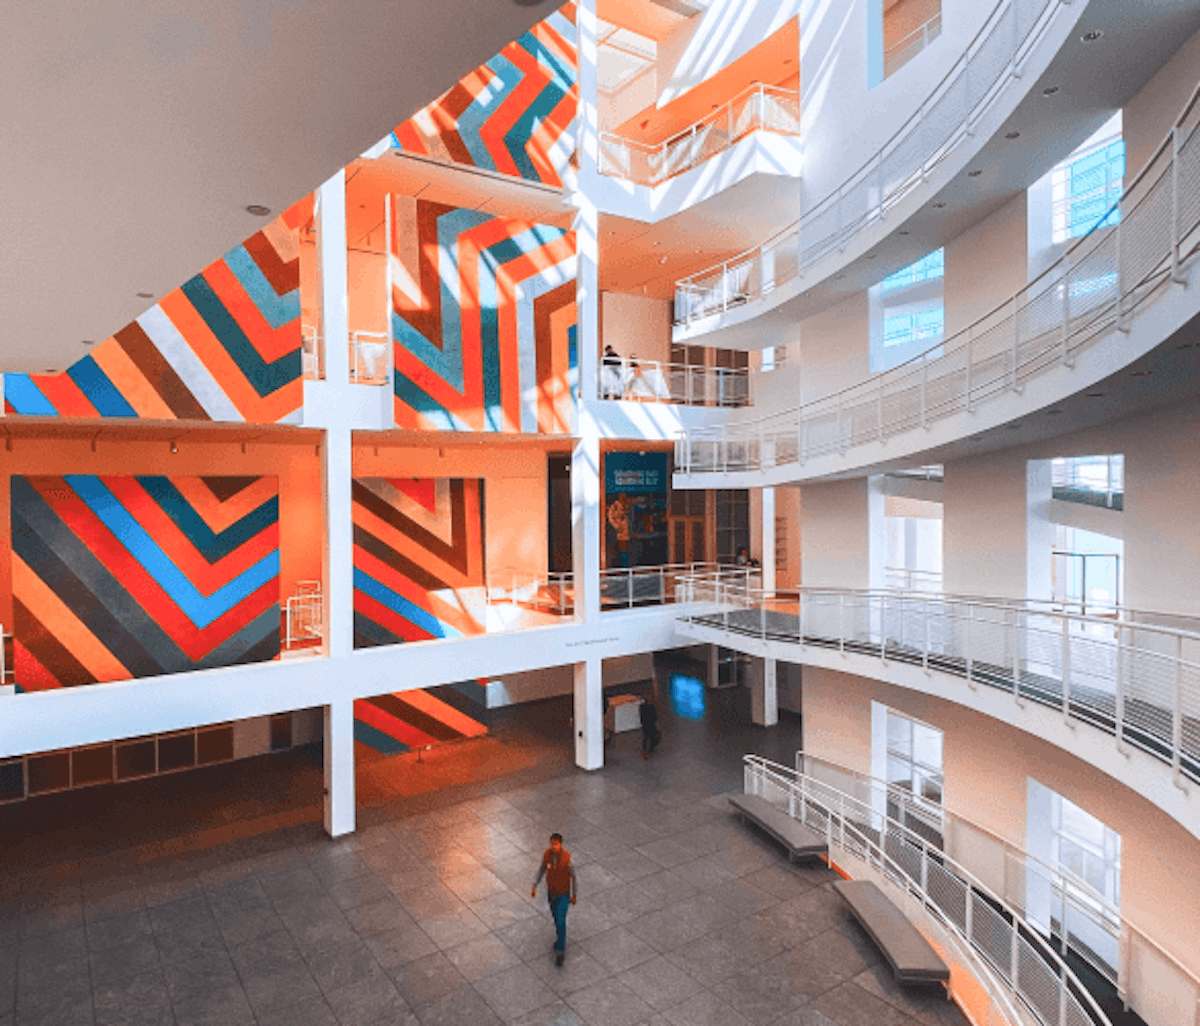 Modern building interior with a colorful striped wall art installation and a lone individual walking through the spacious atrium.